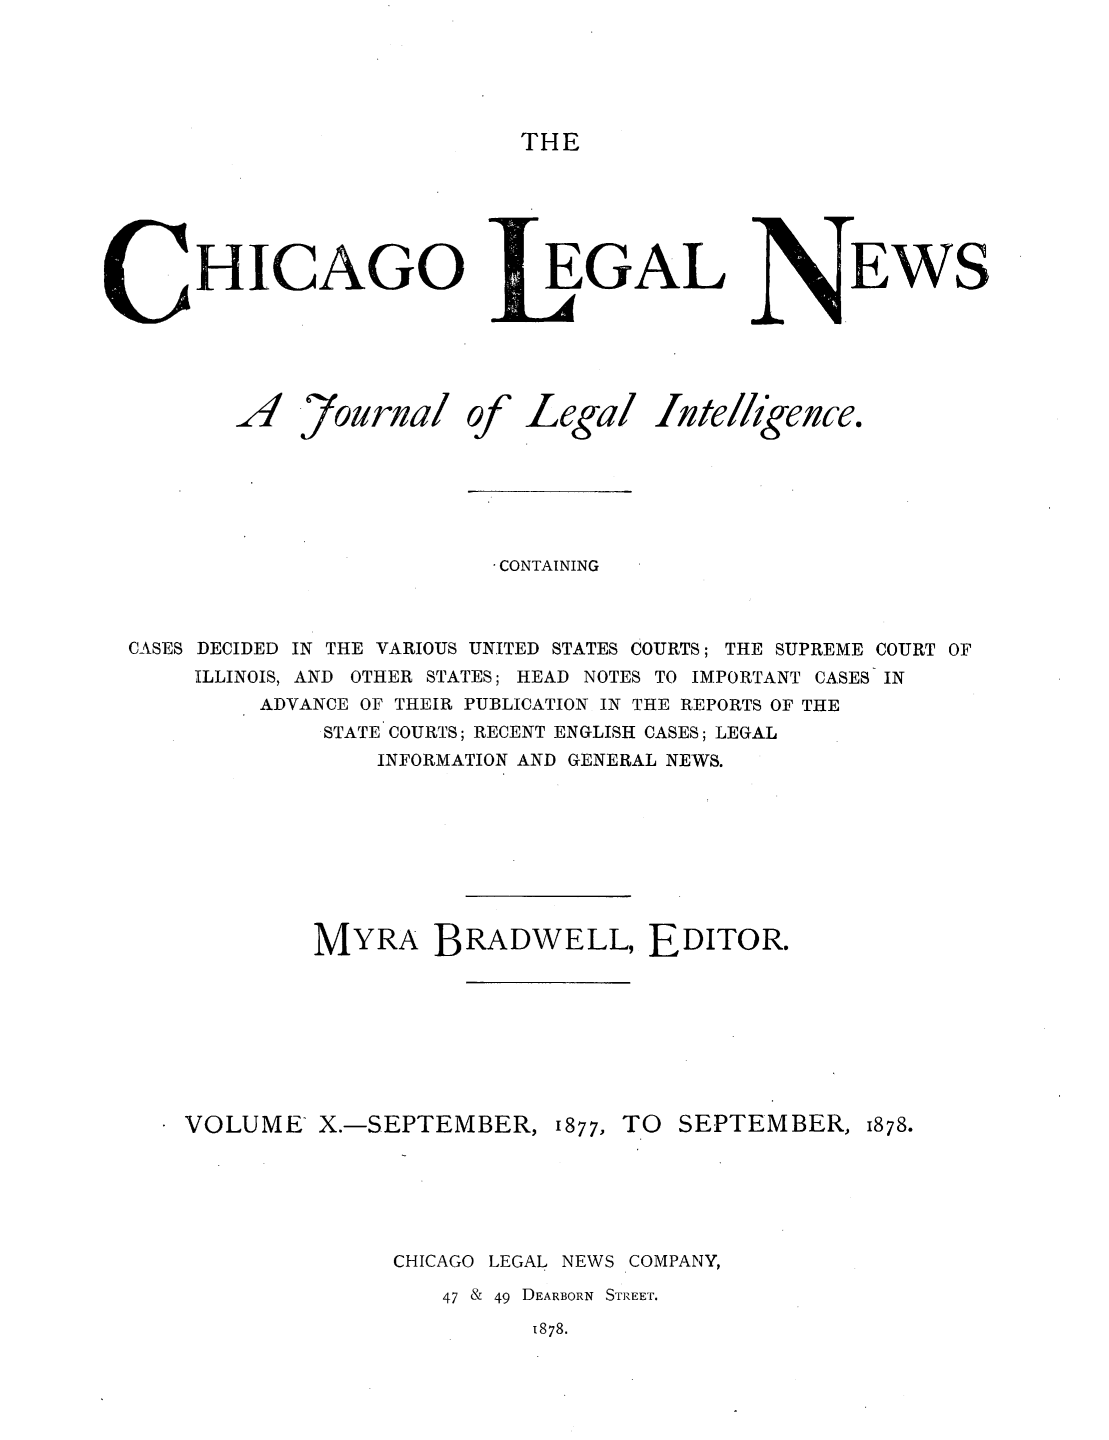 handle is hein.journals/chiclene10 and id is 1 raw text is: THEHICAGO..47ourinalof_GALLegal /IteEWSll'gezce.CONTAININGCASES DECIDED IN THE VARIOUS UNITED STATES COURTS; THE SUPREME COURT OFILLINOIS, AND OTHER STATES; HEAD NOTES TO IMPORTANT CASES- INADVANCE OF THEIR PUBLICATION IN THE REPORTS OF THESTATE COURTS; RECENT ENGLISH CASES; LEGALINFORMATION AND GENERAL NEWS.MYRA BRADWELL, EDITOR.VOLUME X.-SEPTEMBER, 1877, TO SEPTEMBER, 1878.CHICAGO LEGAL NEWS COMPANY,47 & 49 DEARBORN STREET.1878.